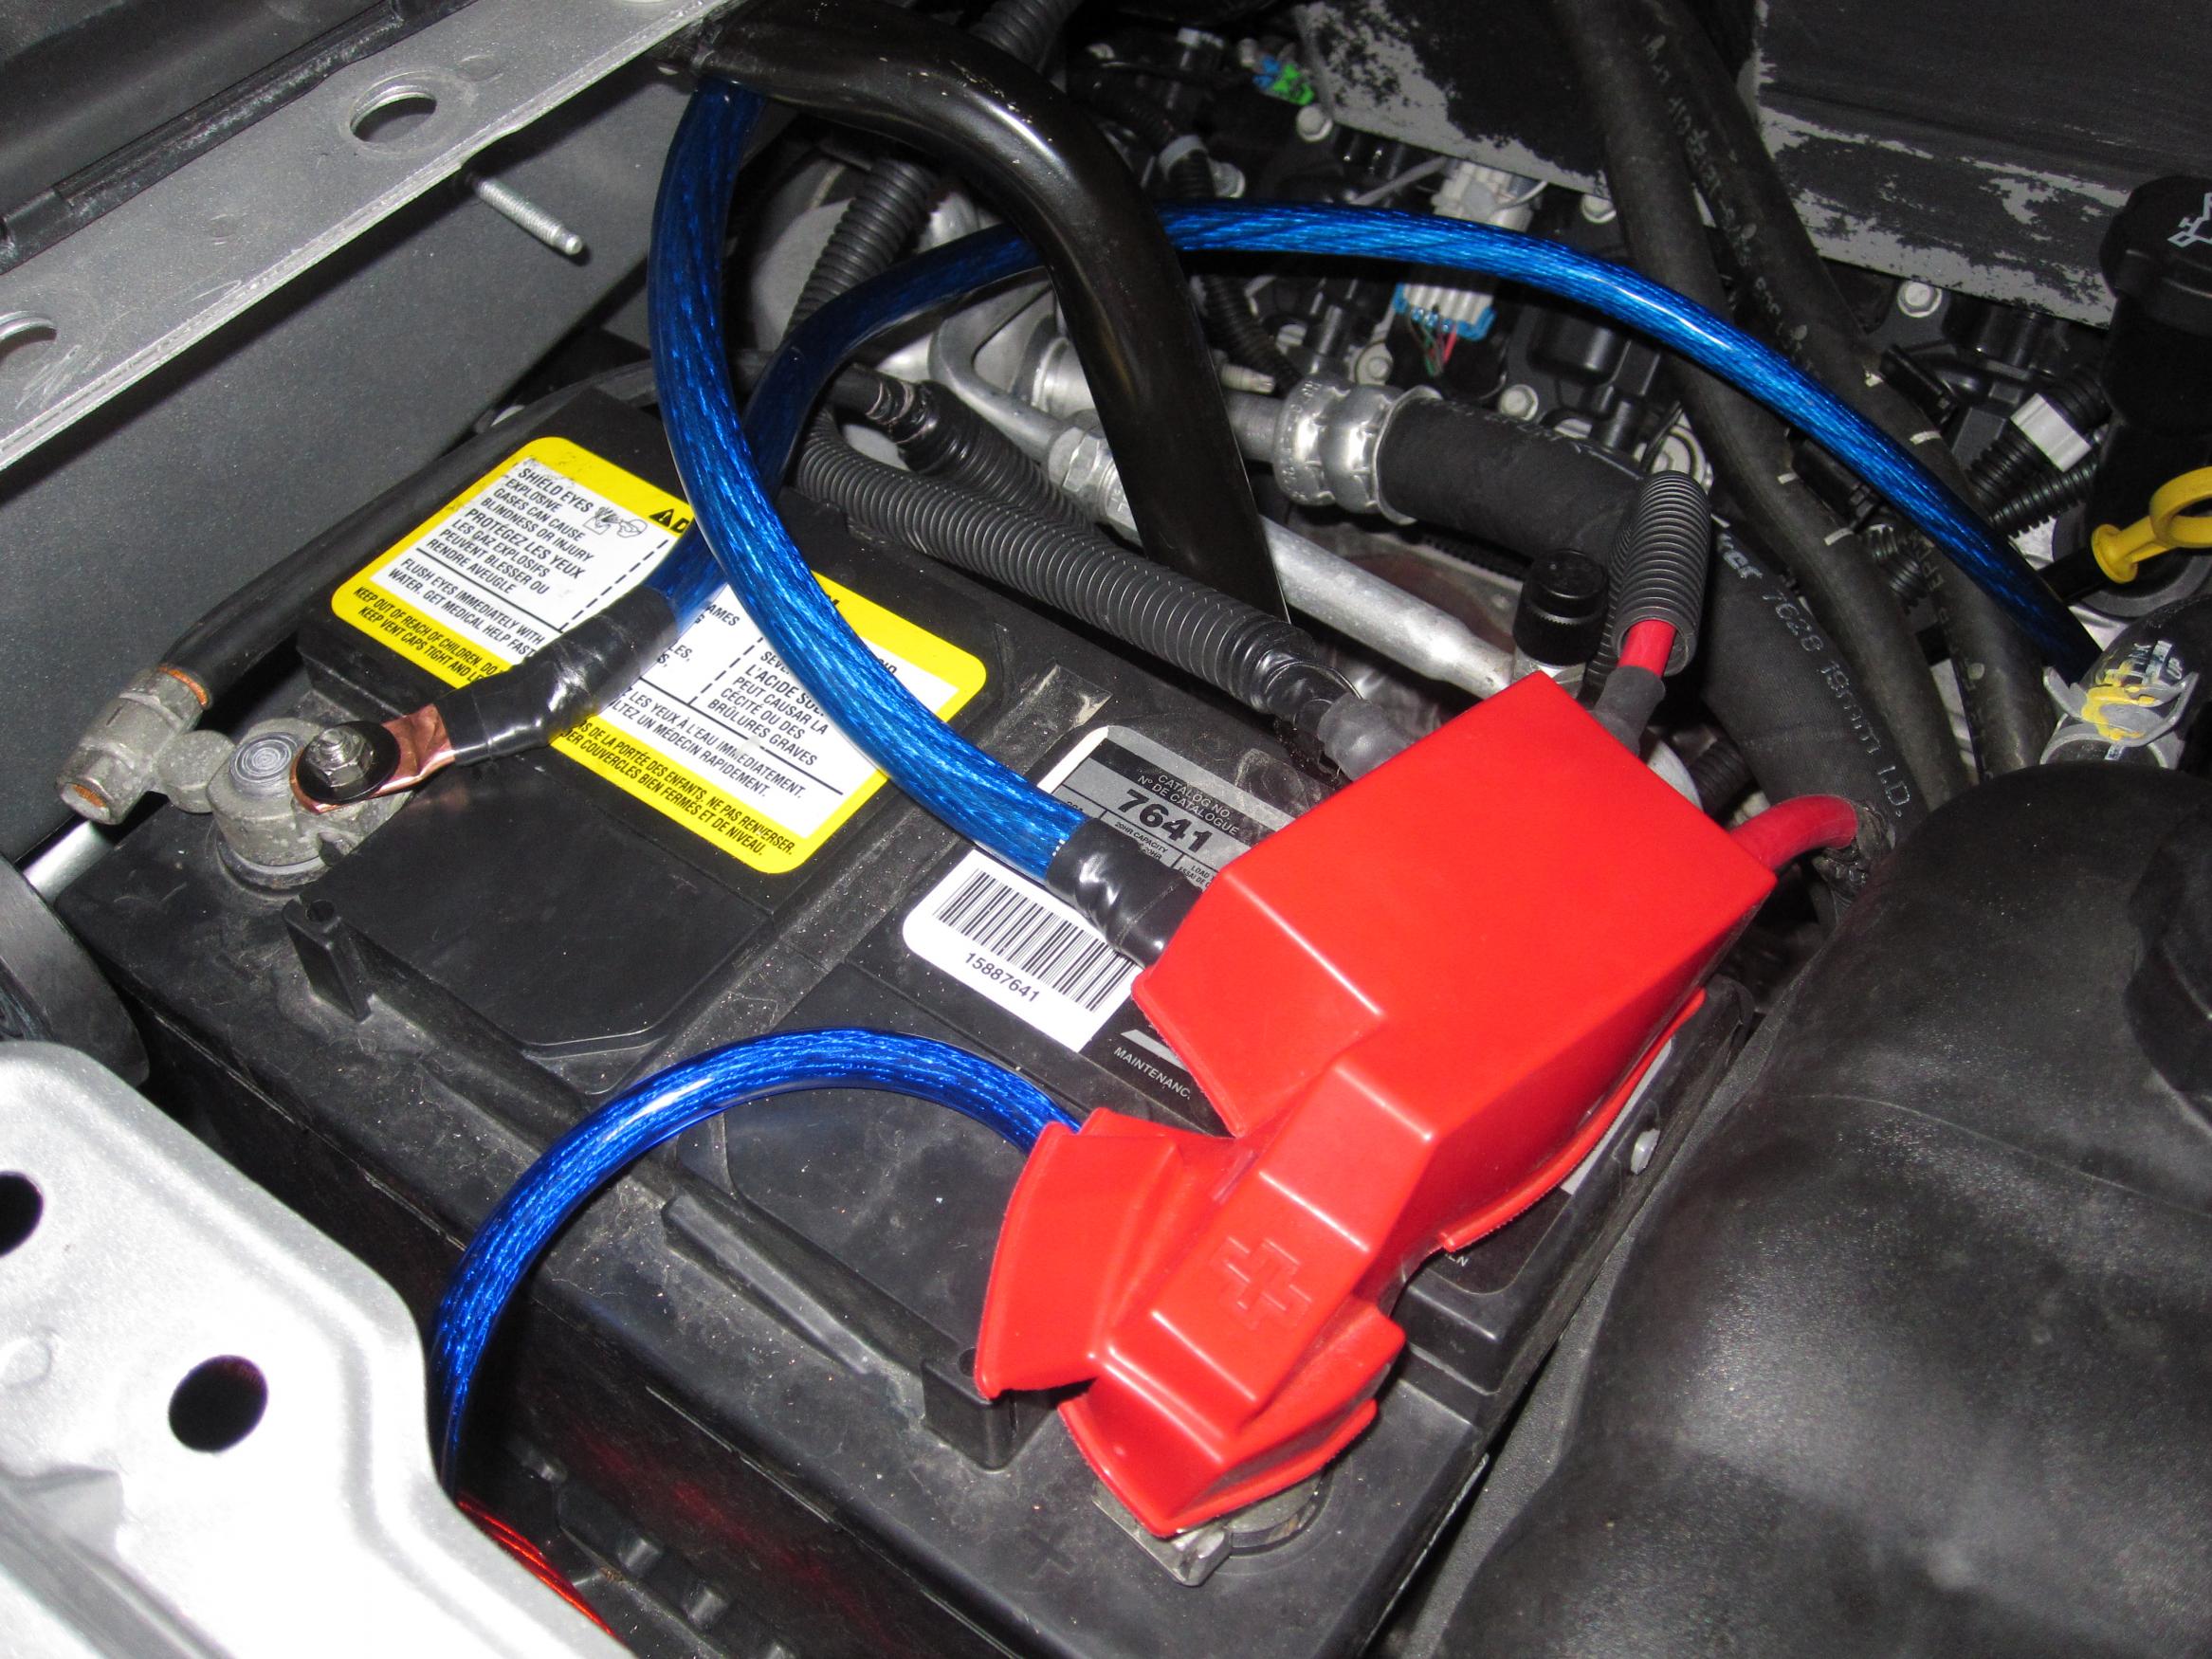 Big 3 wiring upgrade step by step with pics! - Chevrolet Forum - Chevy